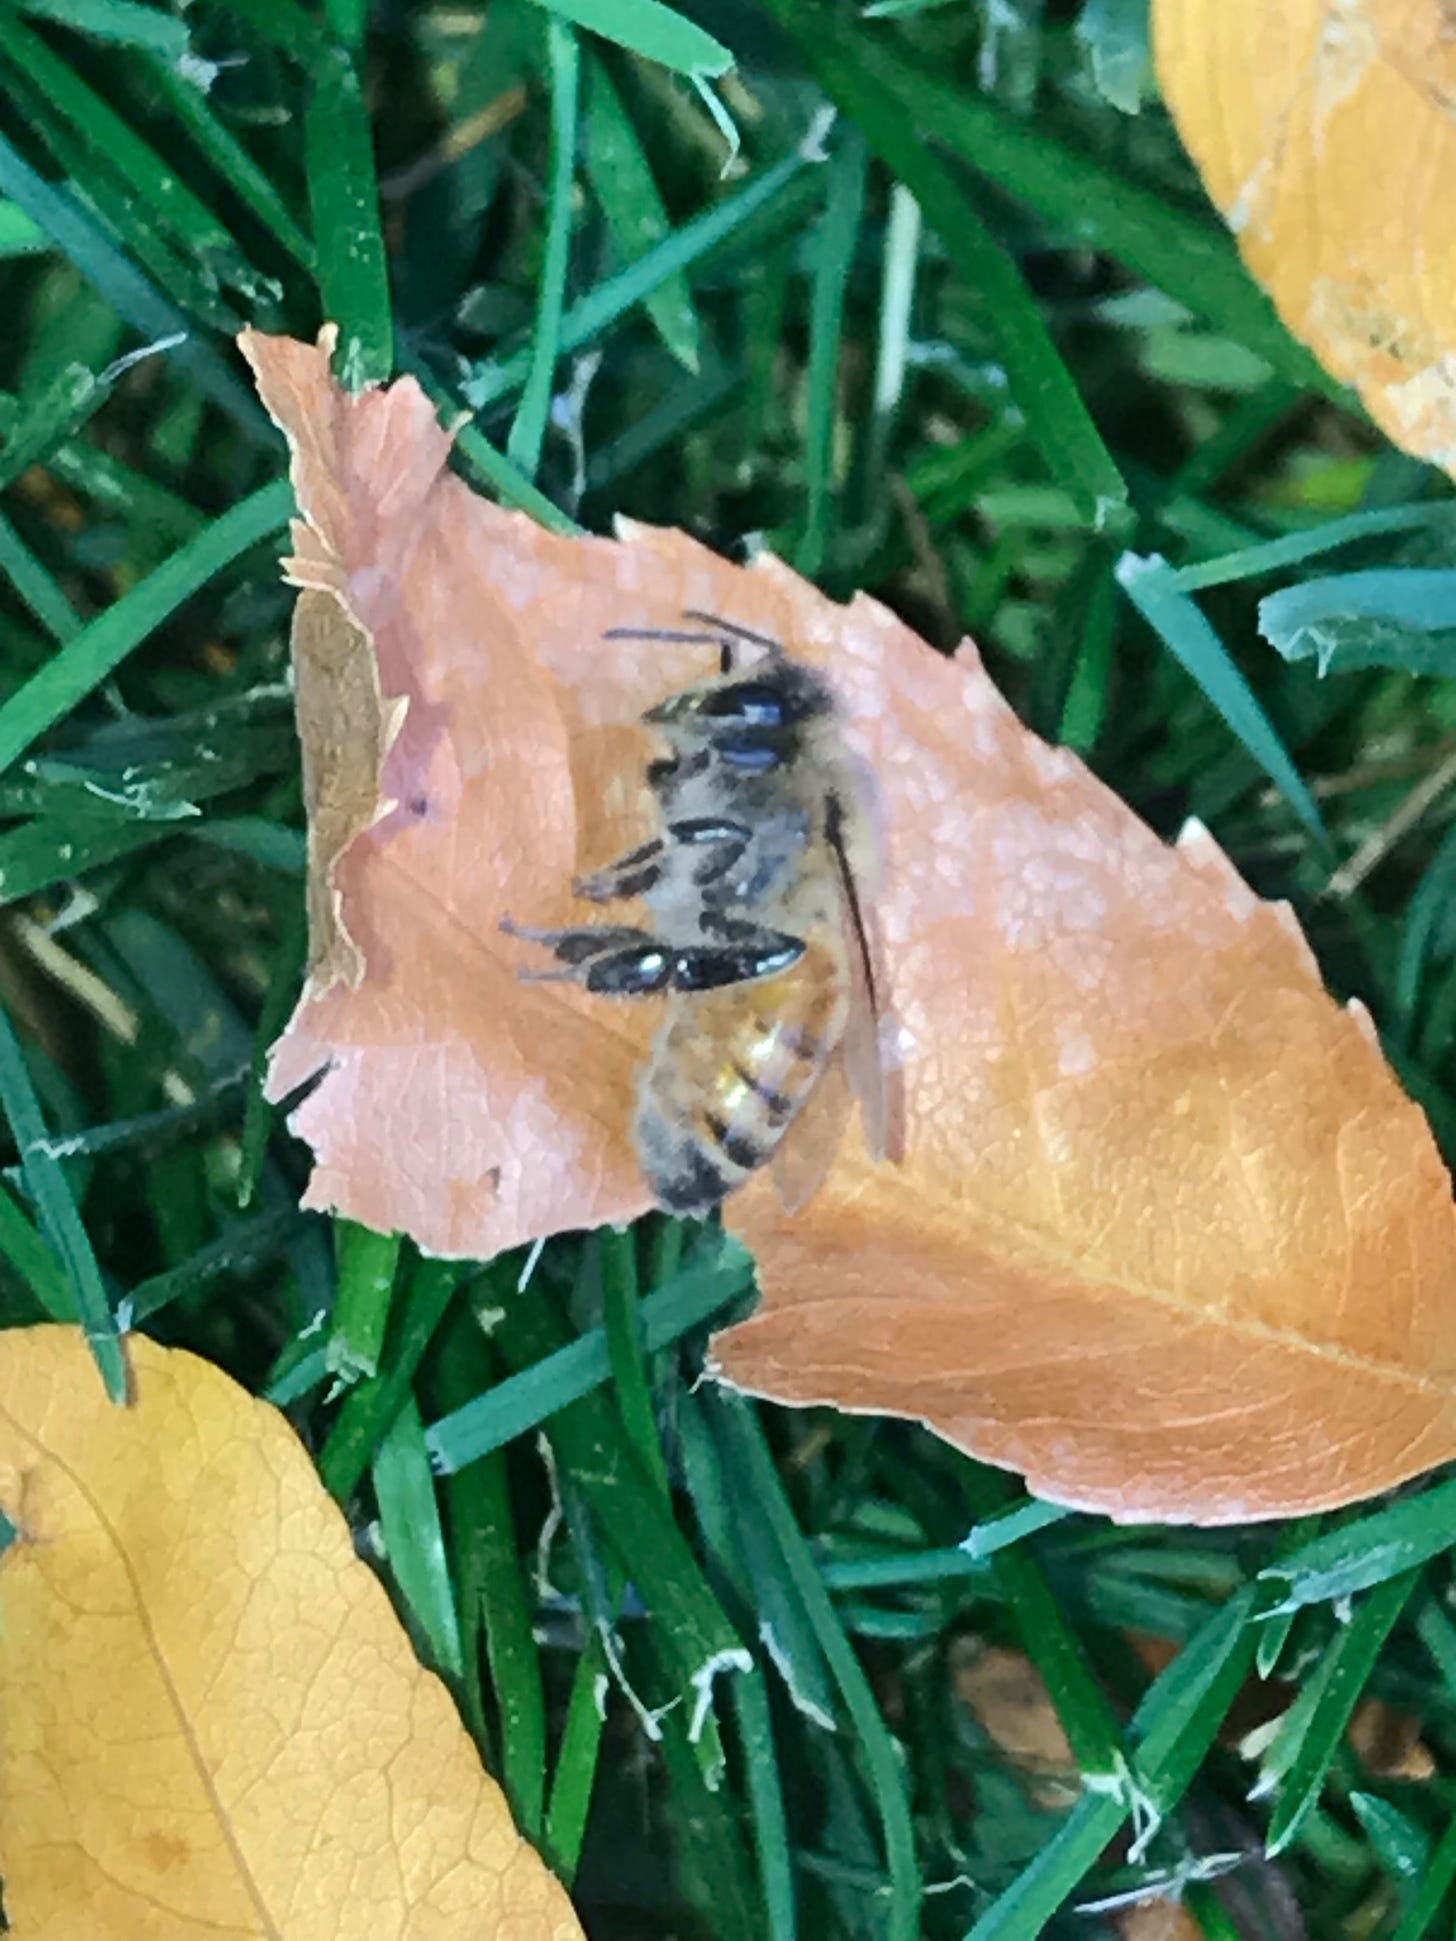 A dead bee on a leaf.